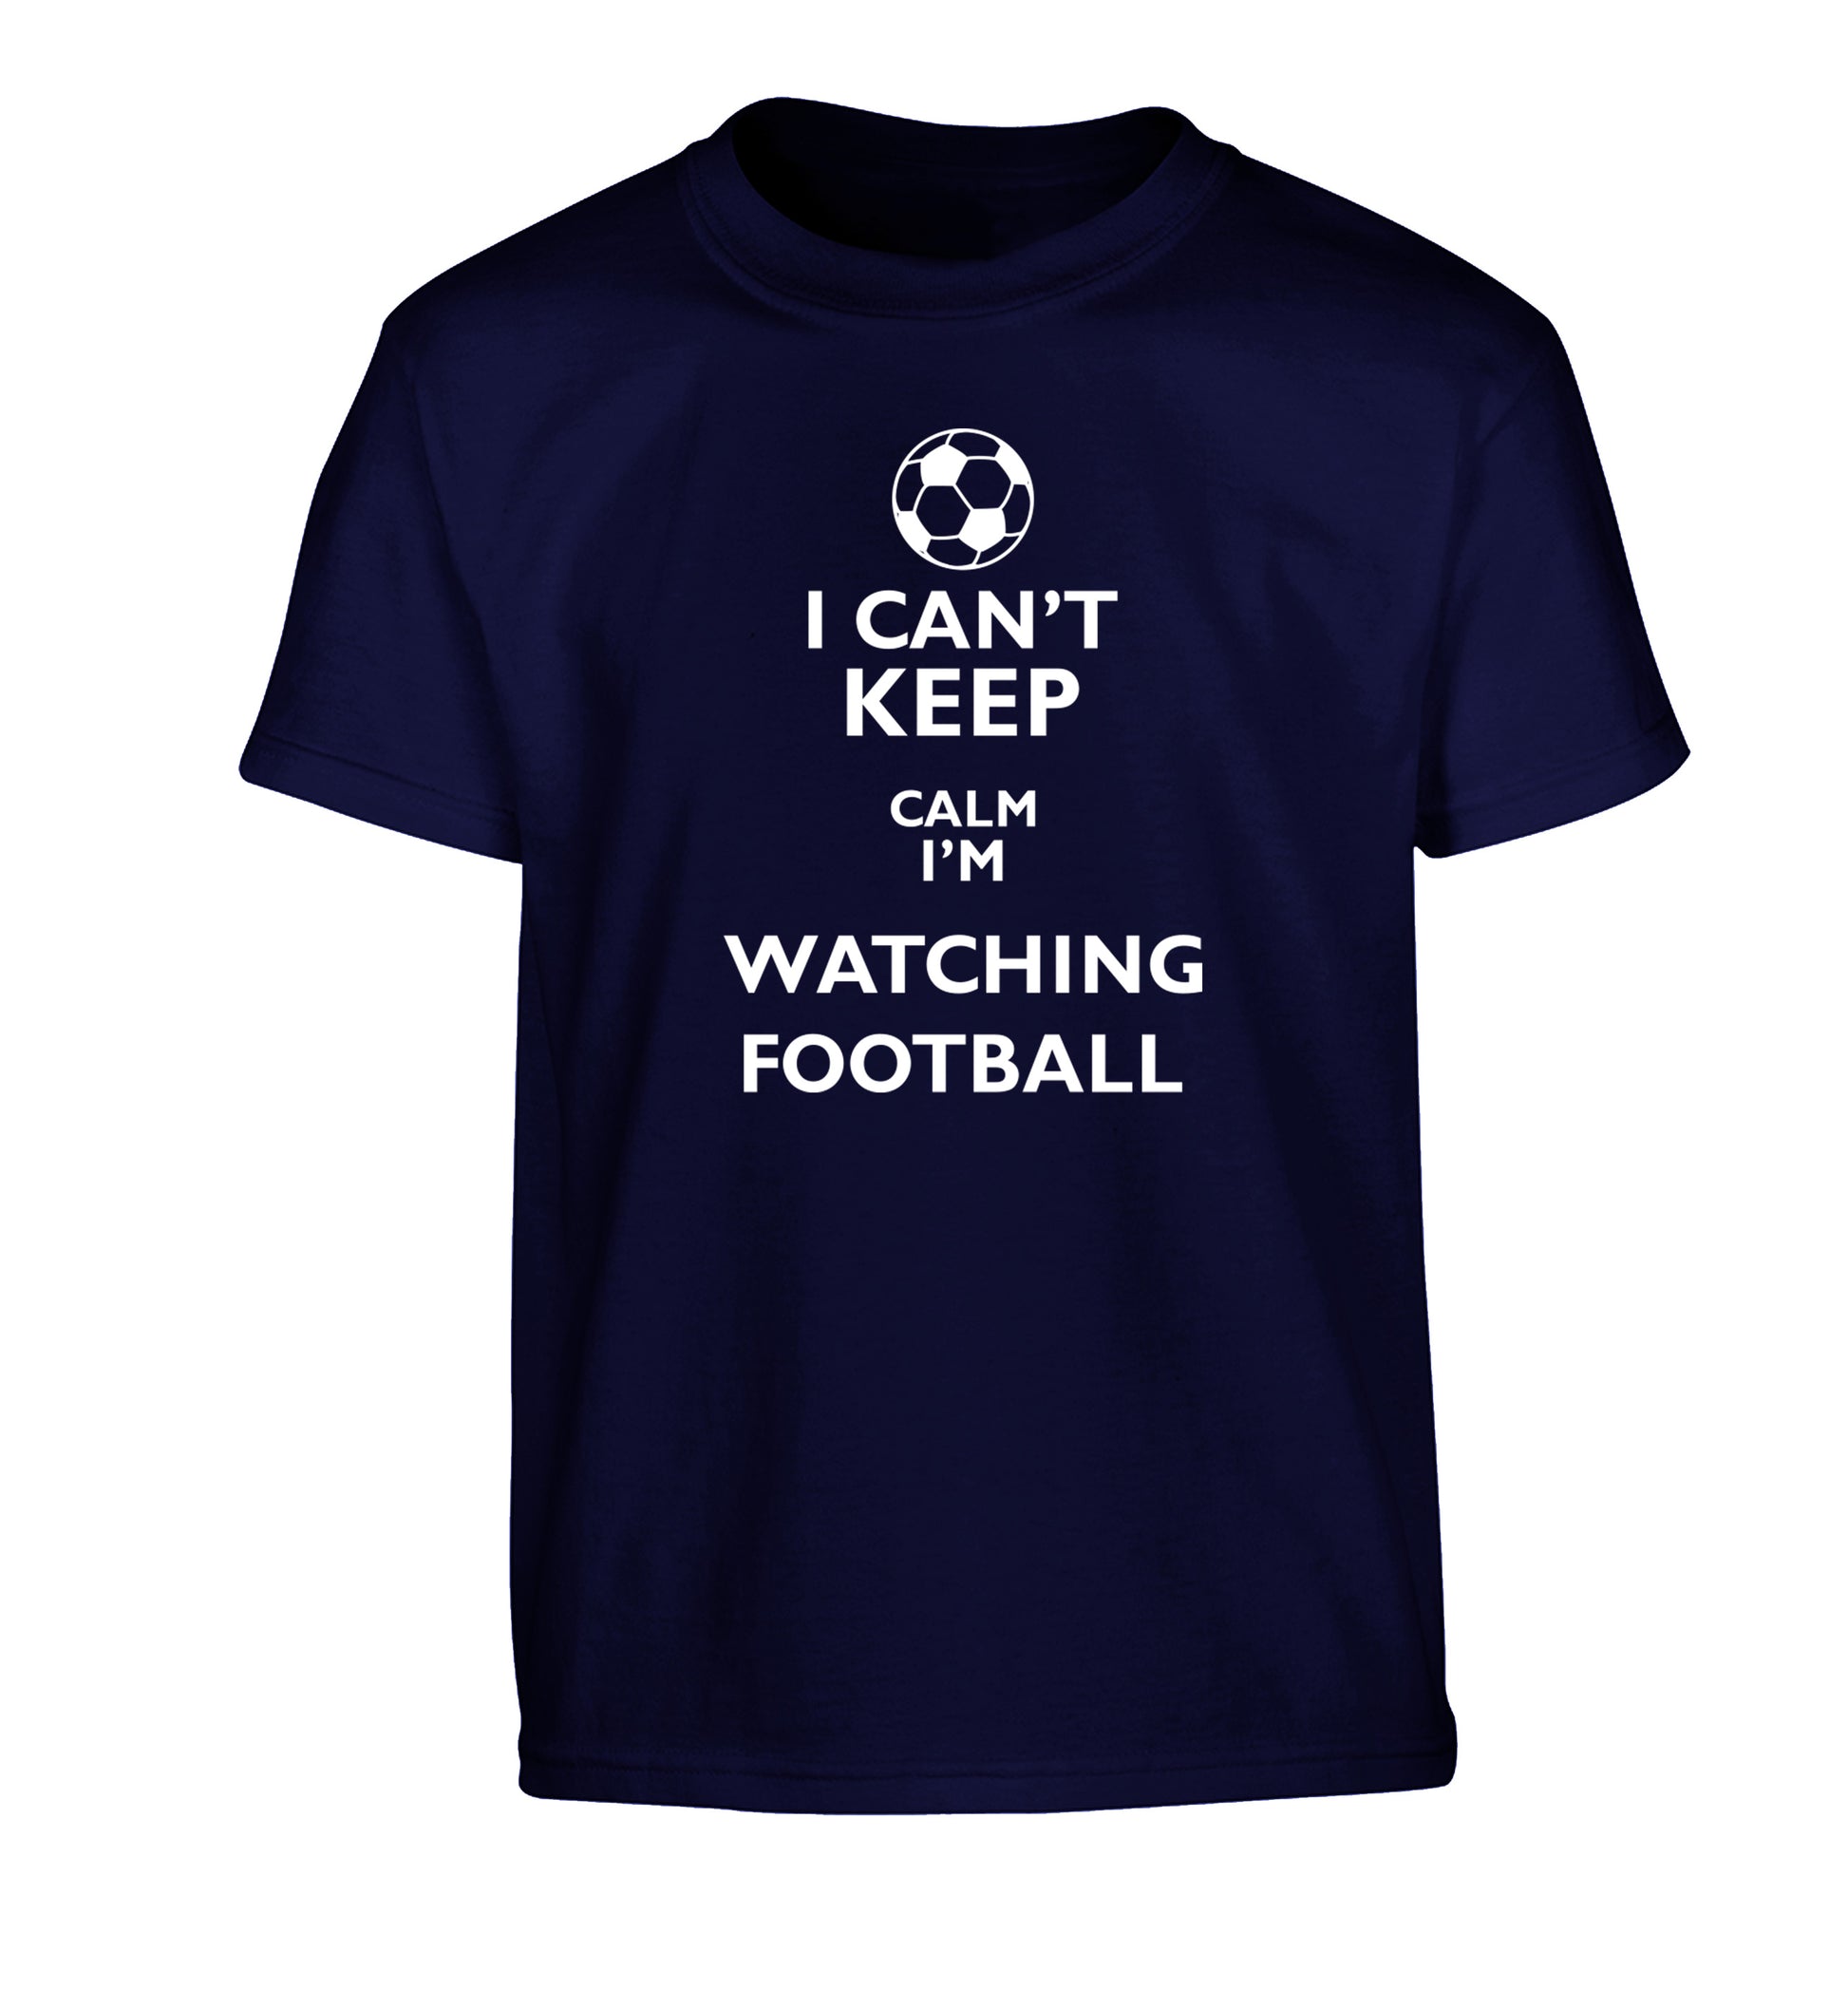 I can't keep calm I'm watching the football Children's navy Tshirt 12-14 Years